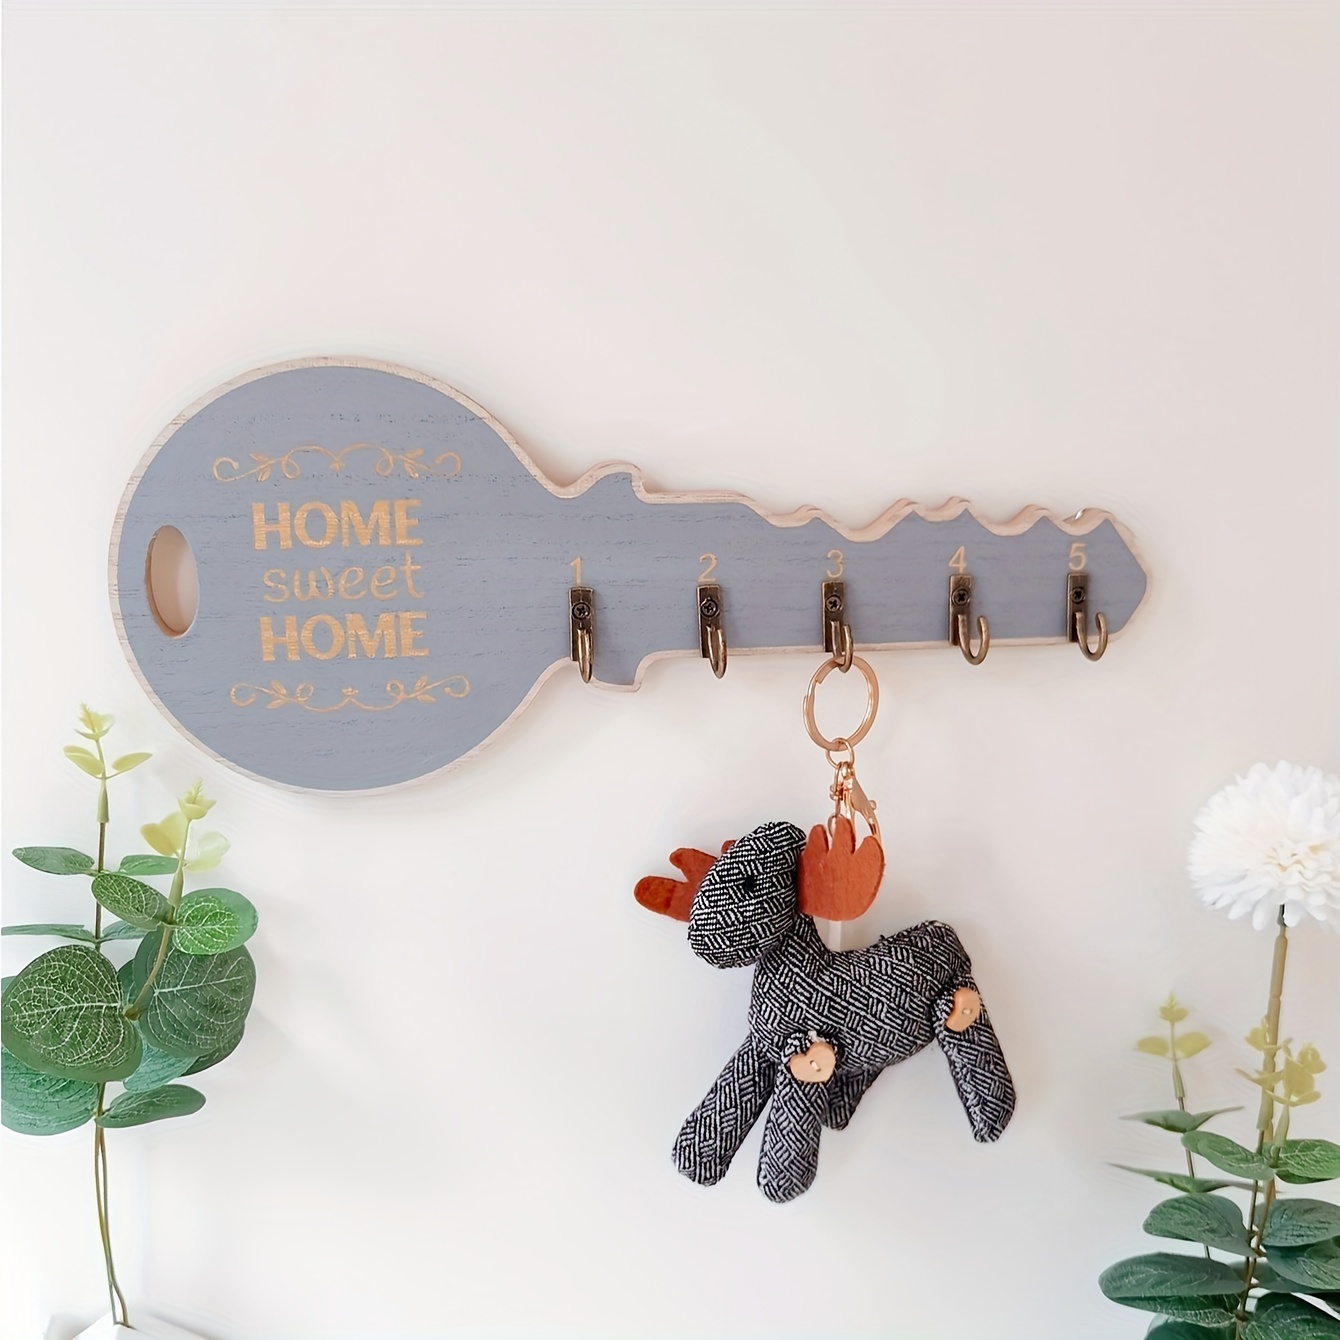 Creative Sticky Cute Key Holder Adhesive Wall Hooks Key Hook Holder  Decorative Rack Self Adhesive for Entryway Door Bathroom Kitchen and More  (12 Pcs